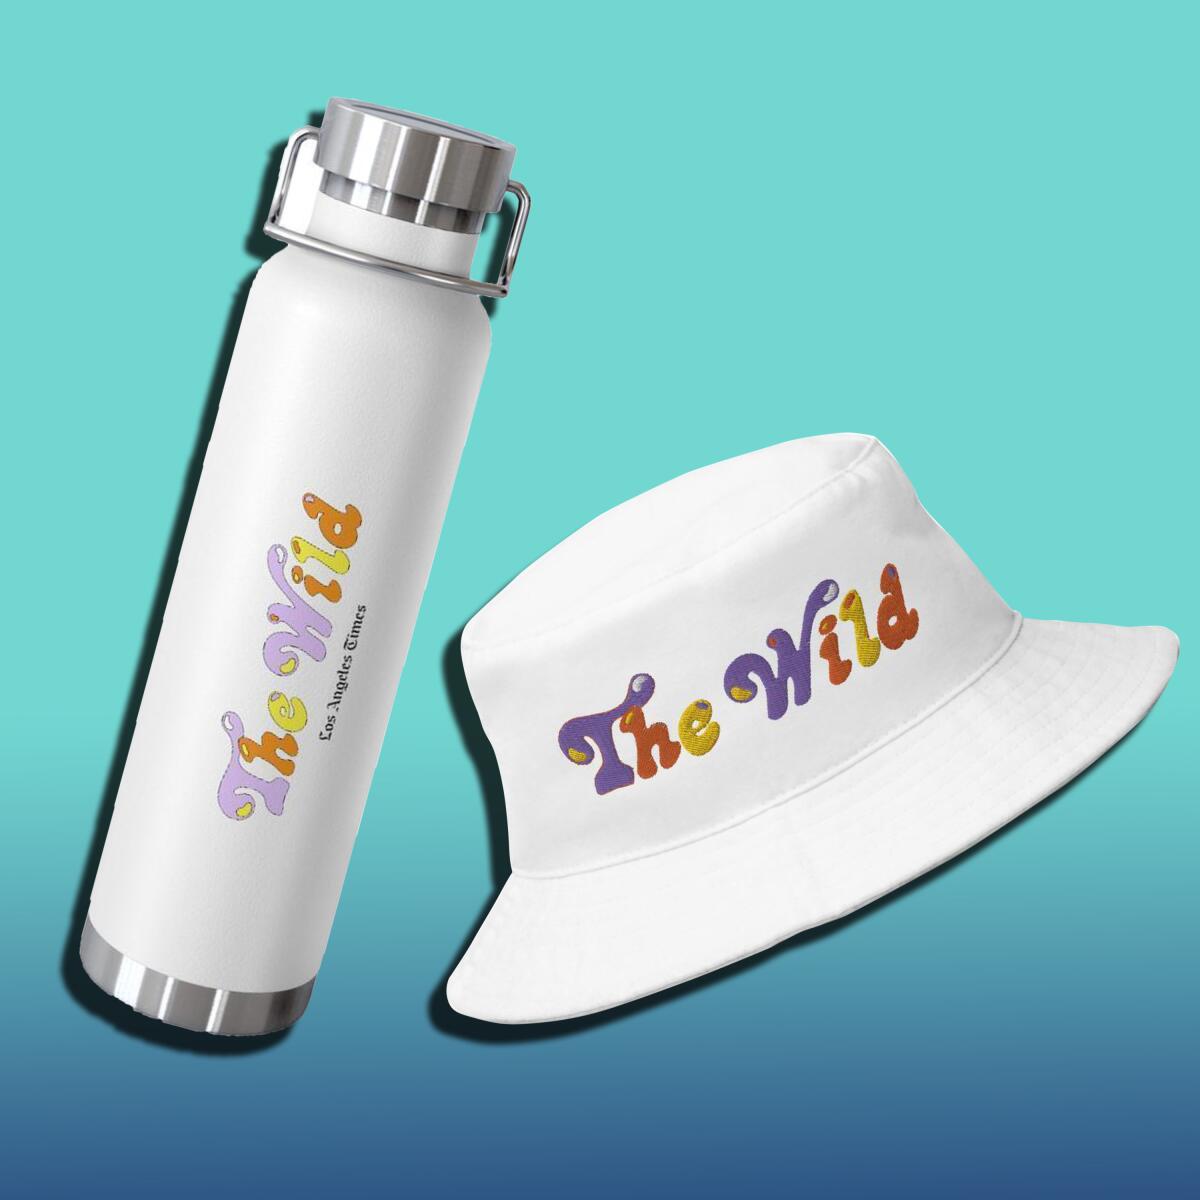 A metal water bottle and a bucket hat emblazoned with the words "The Wild."